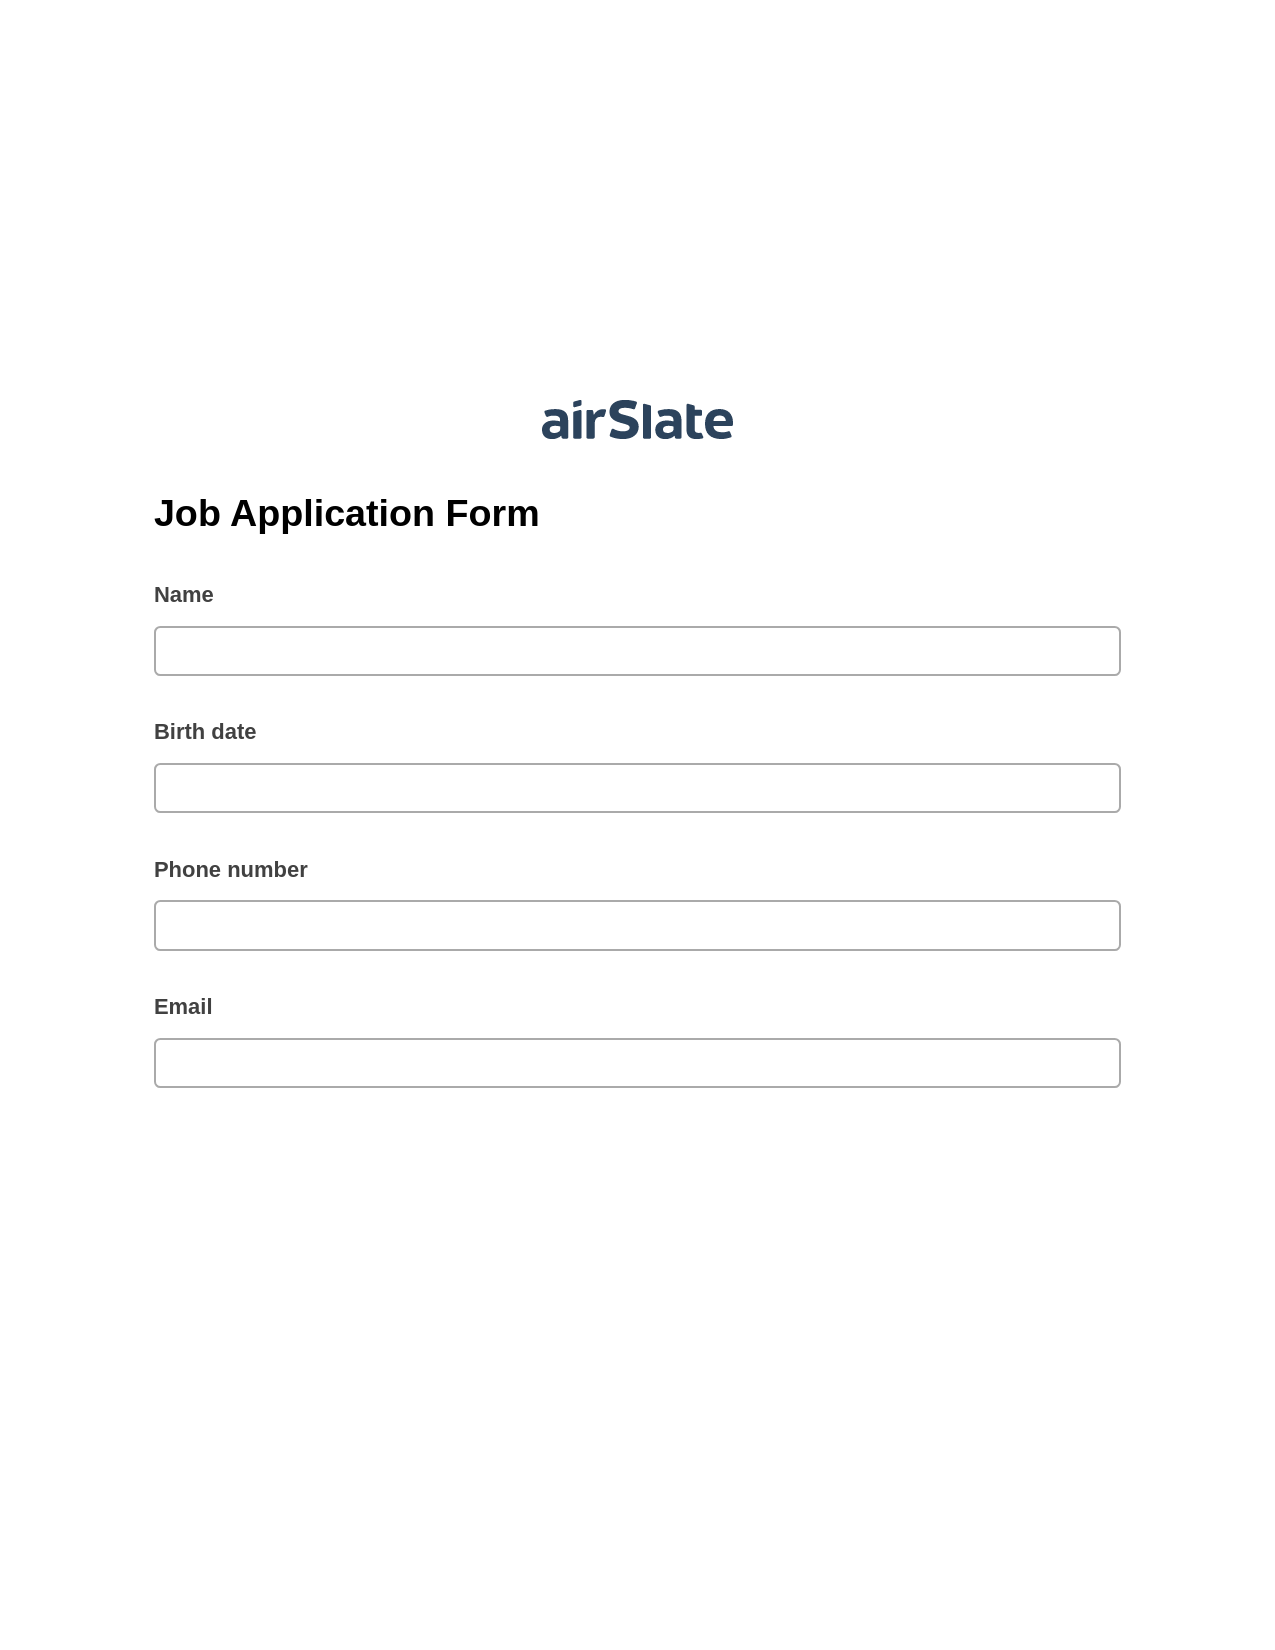 Job Application Form Pre-fill from Smartsheet Bot, System Bot - Create a Slate in another Flow, Dropbox Bot